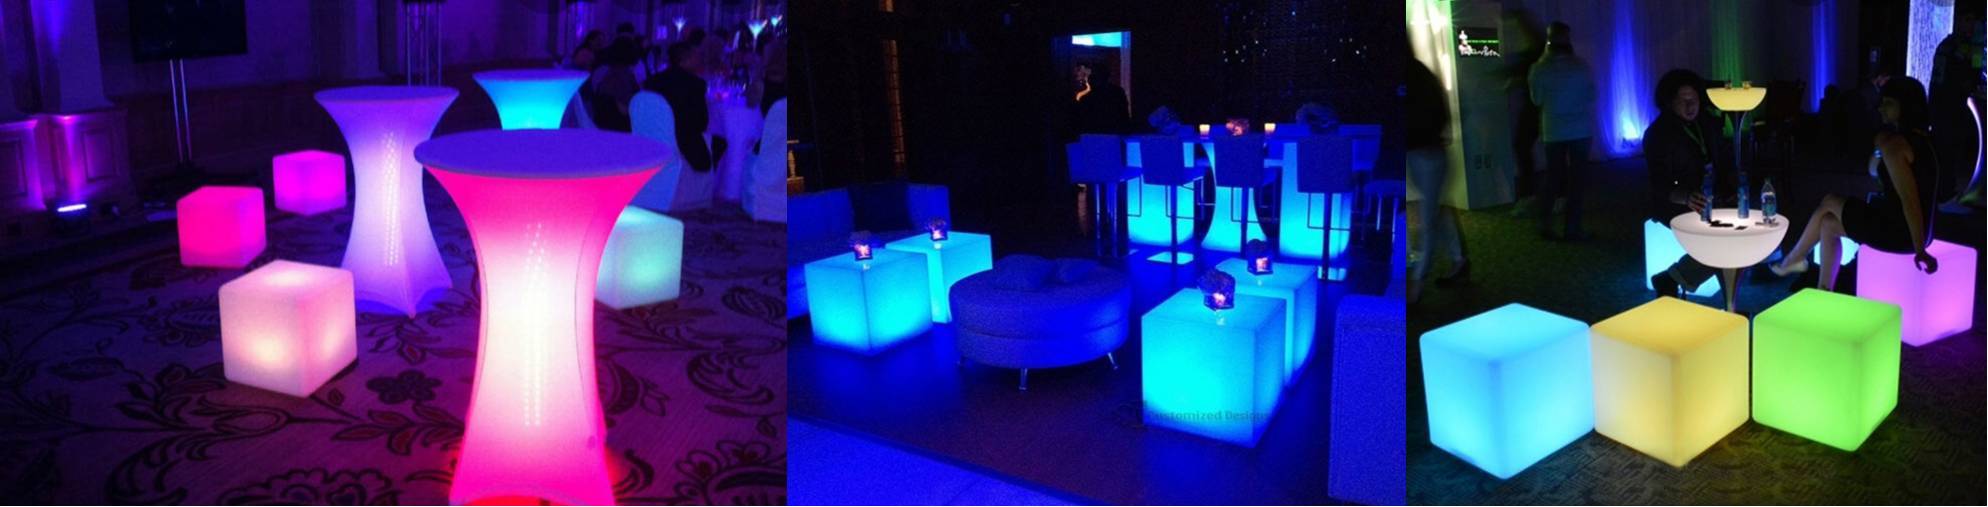 Led Party Furniture Rental In Long Island And Nyc Extreme Video